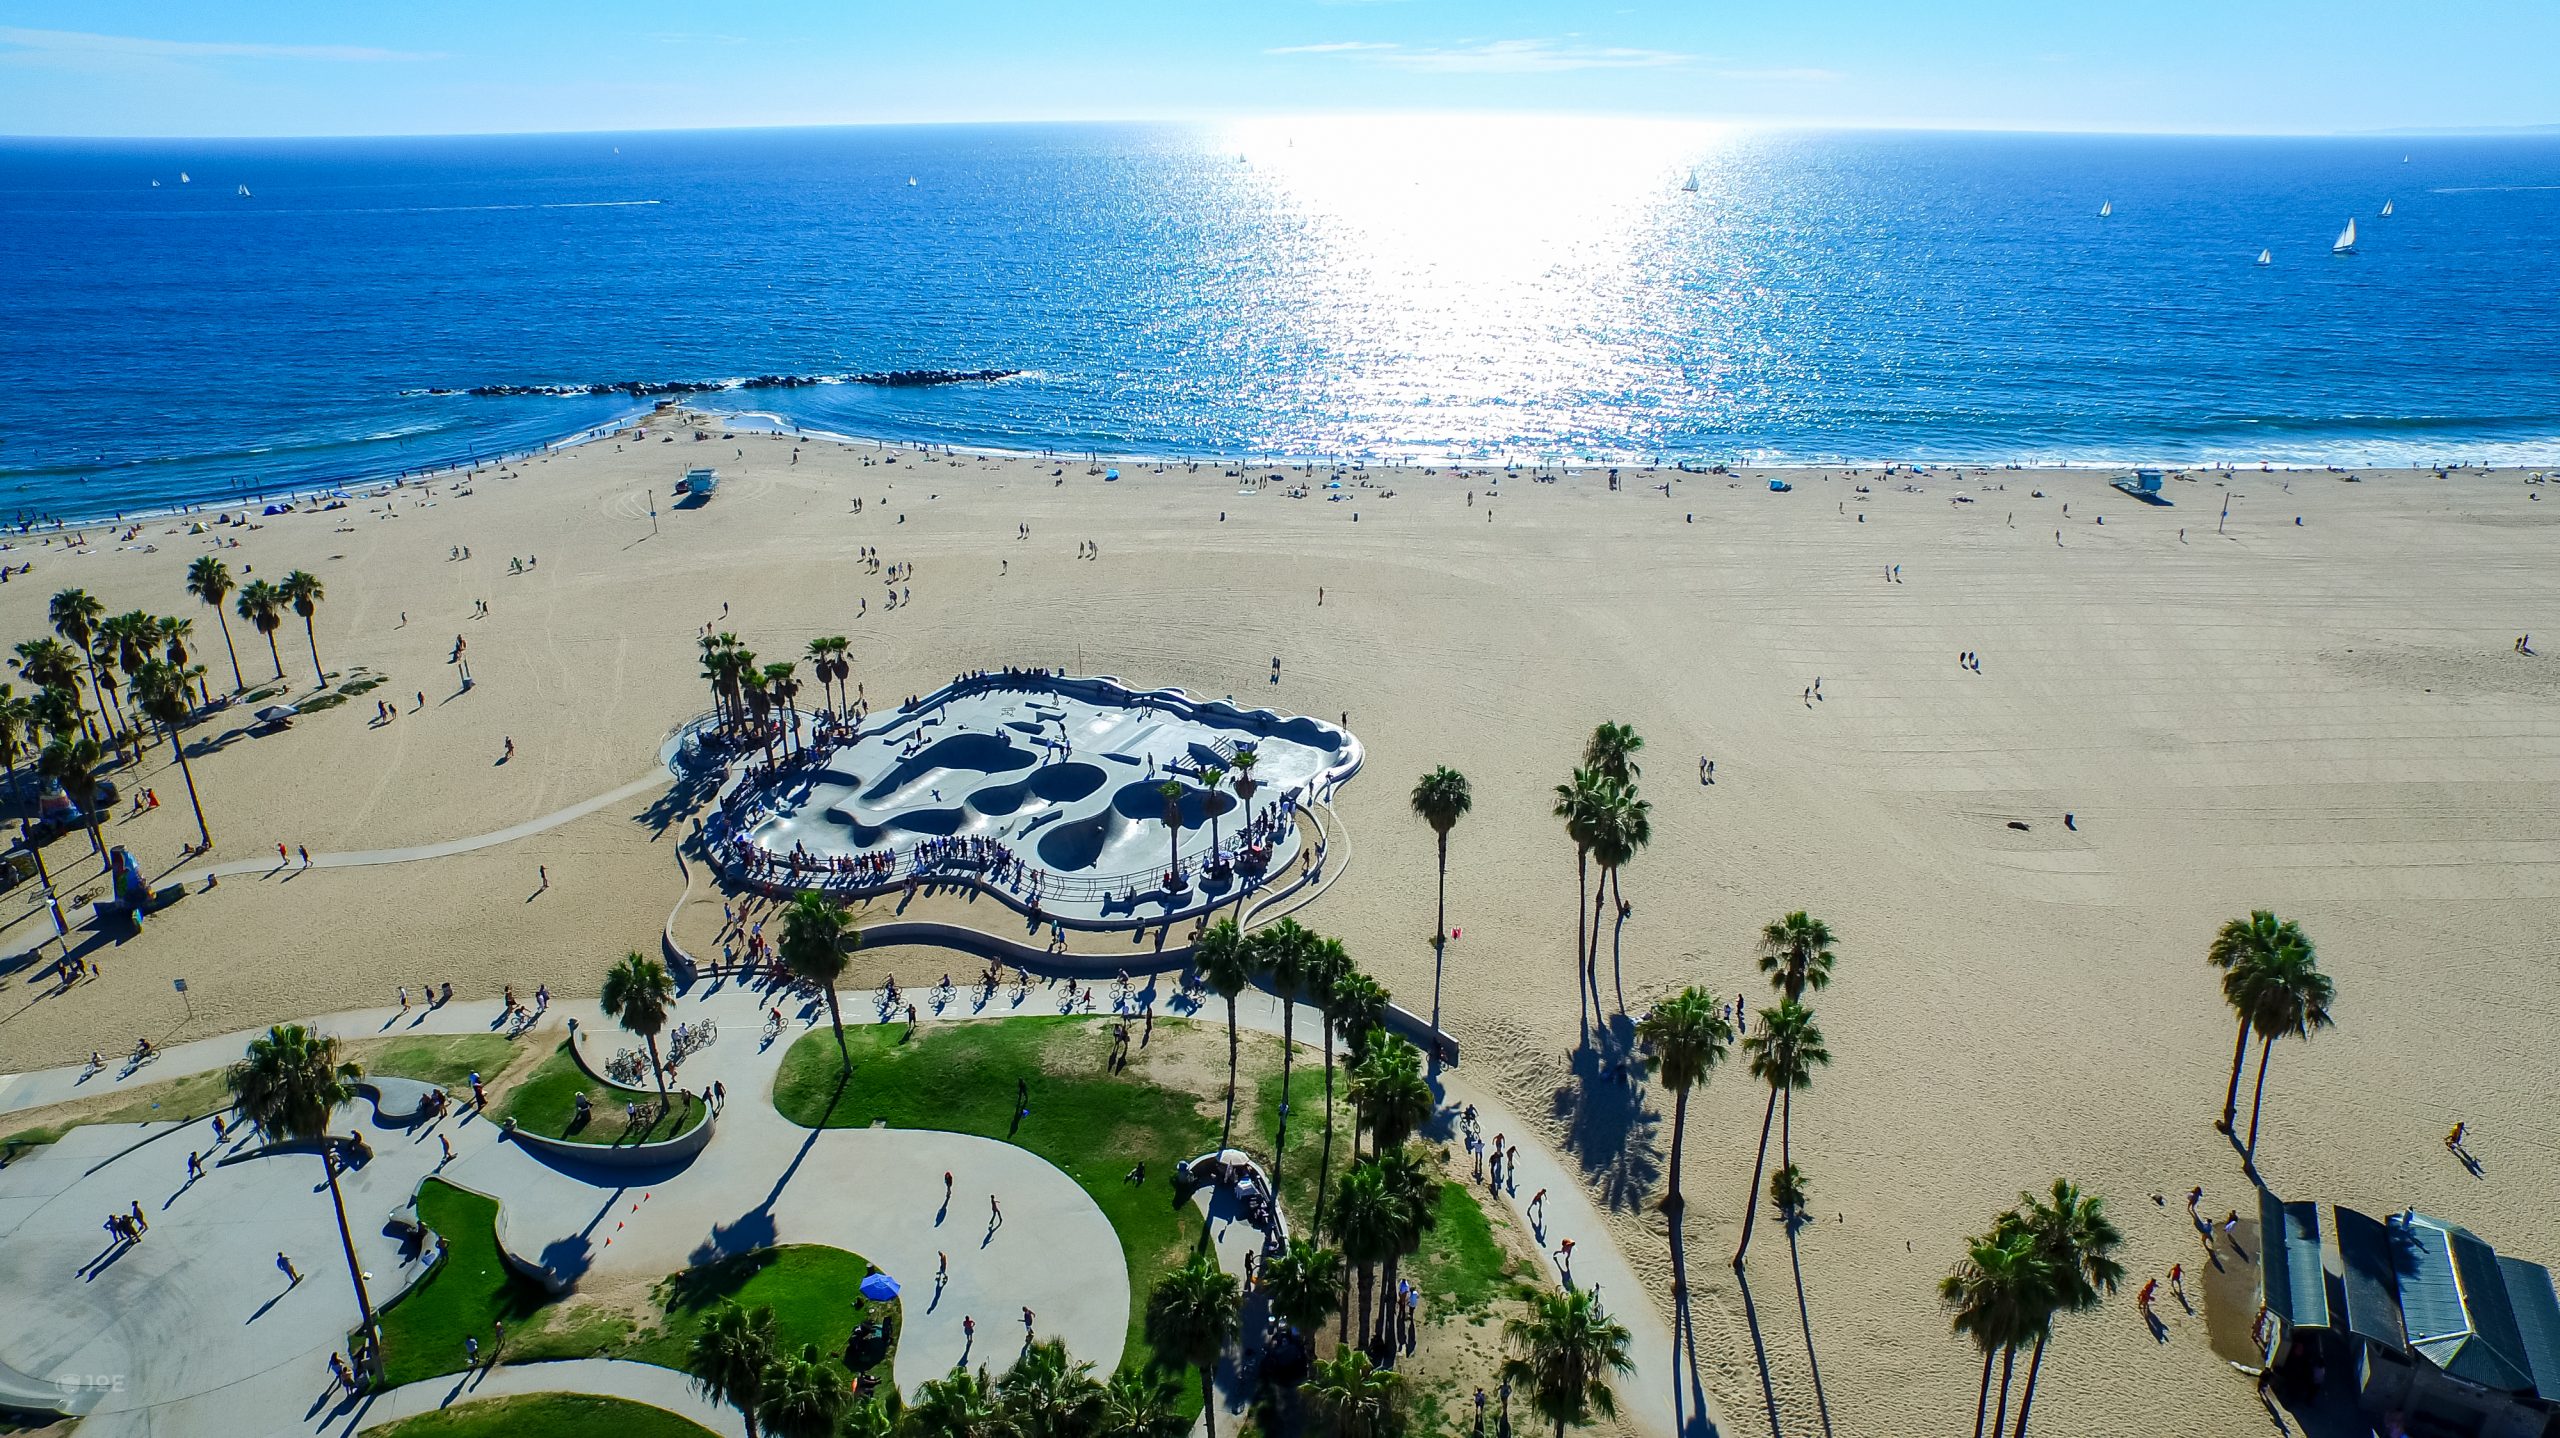 An ariel view of the beach in Los Angeles